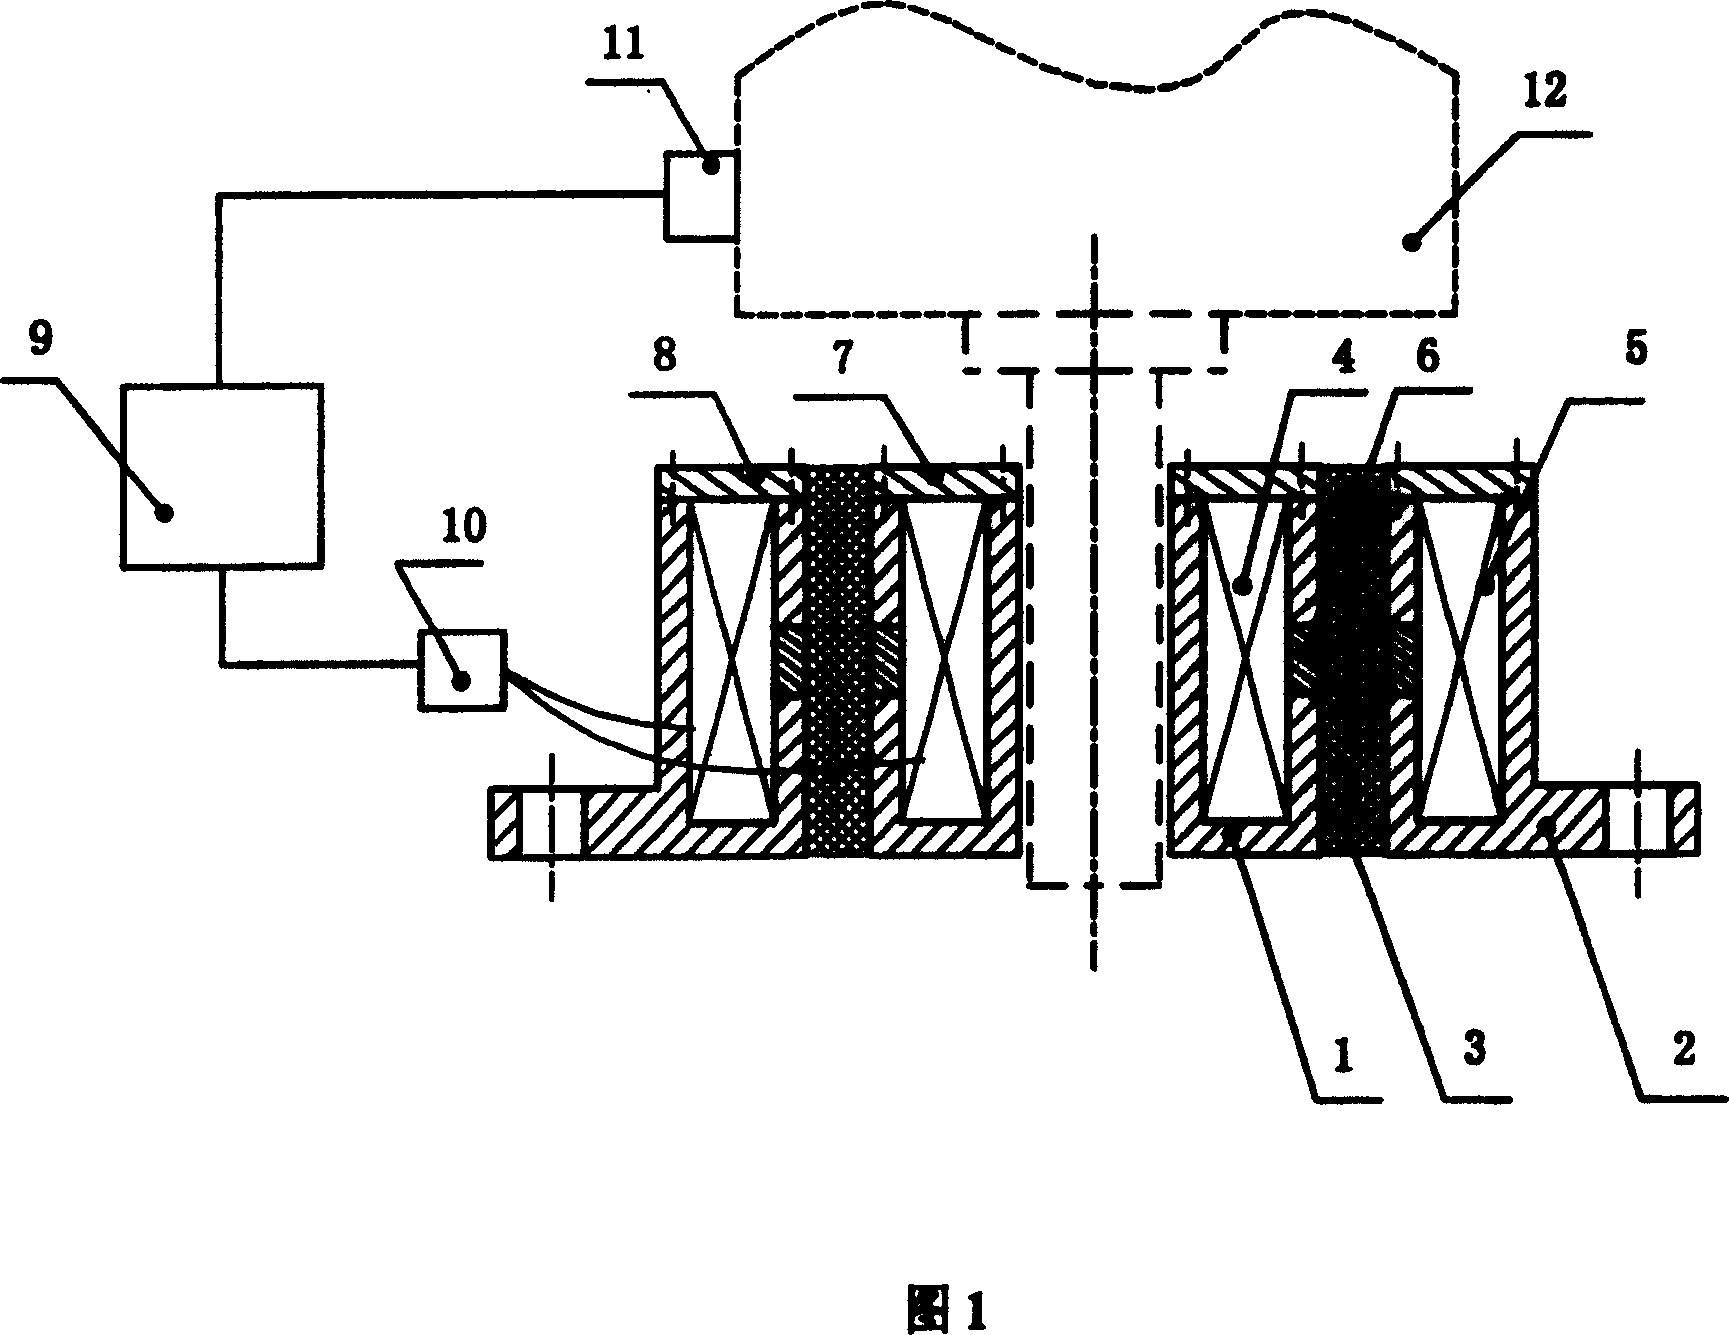 Vibration damper with controllable stiffness and damping